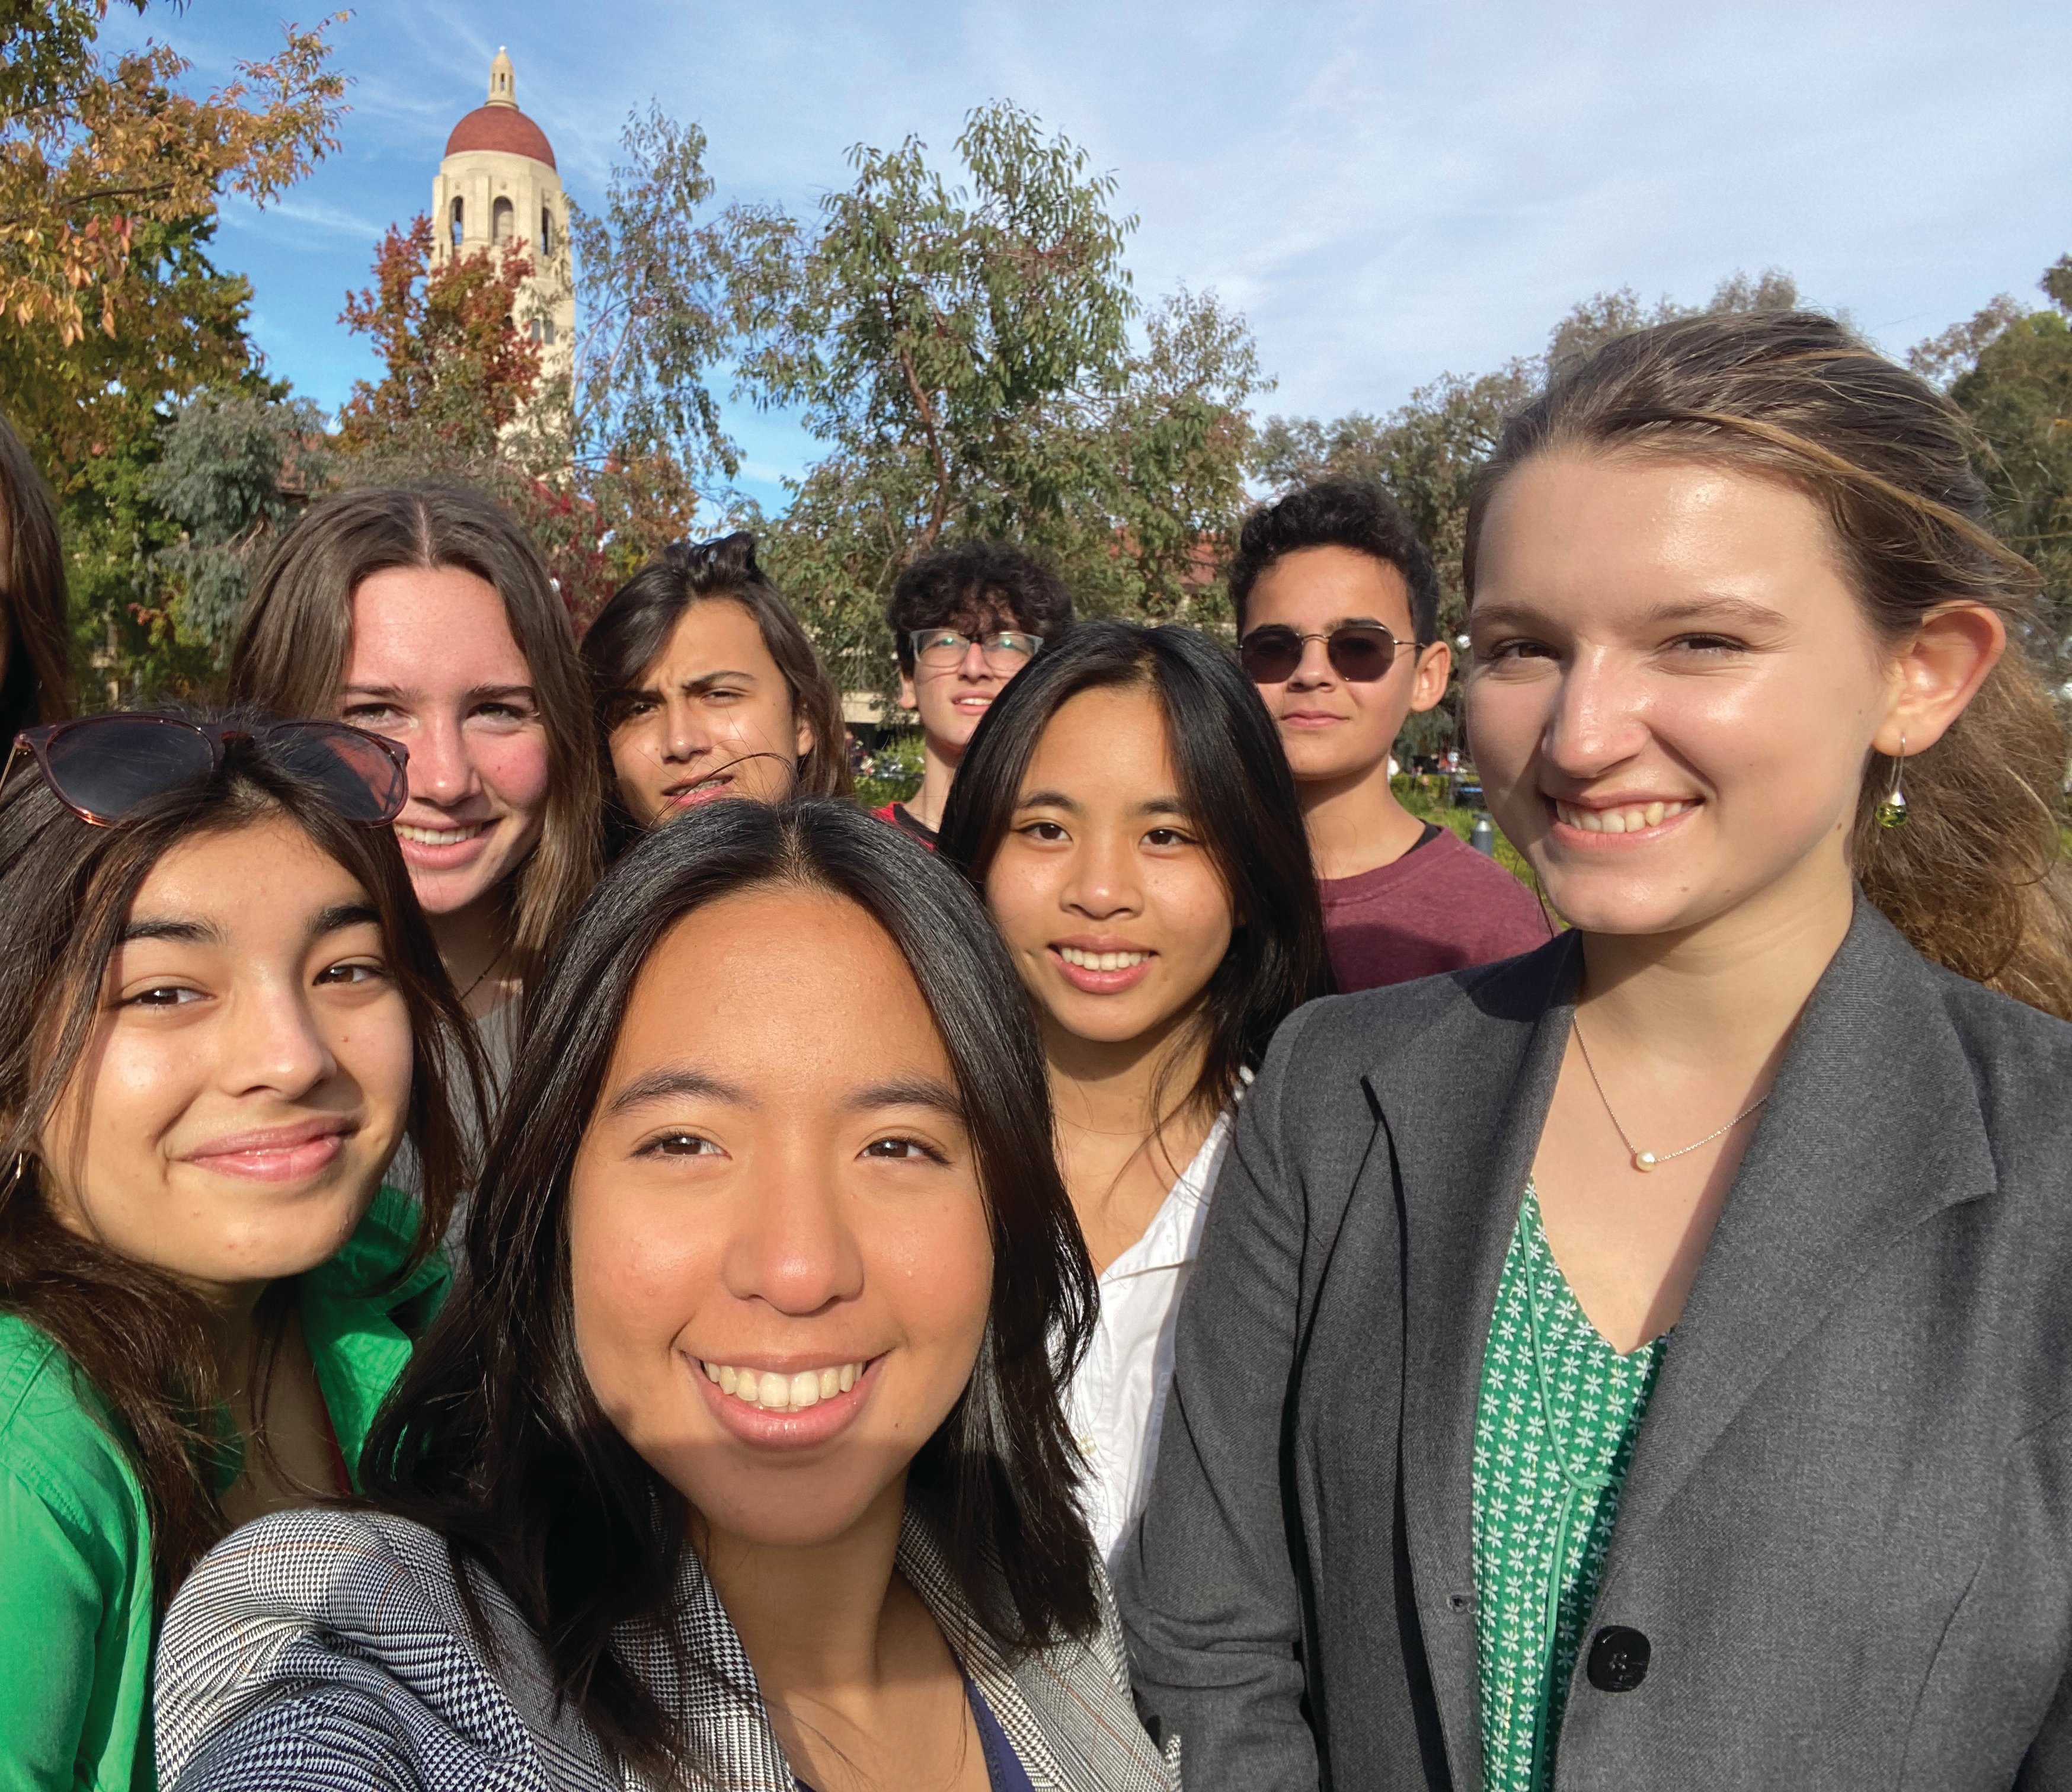 Rox R. taking a selfie with her Model UN teammates on the Stanford Campus with the Hoover Tower in the background.